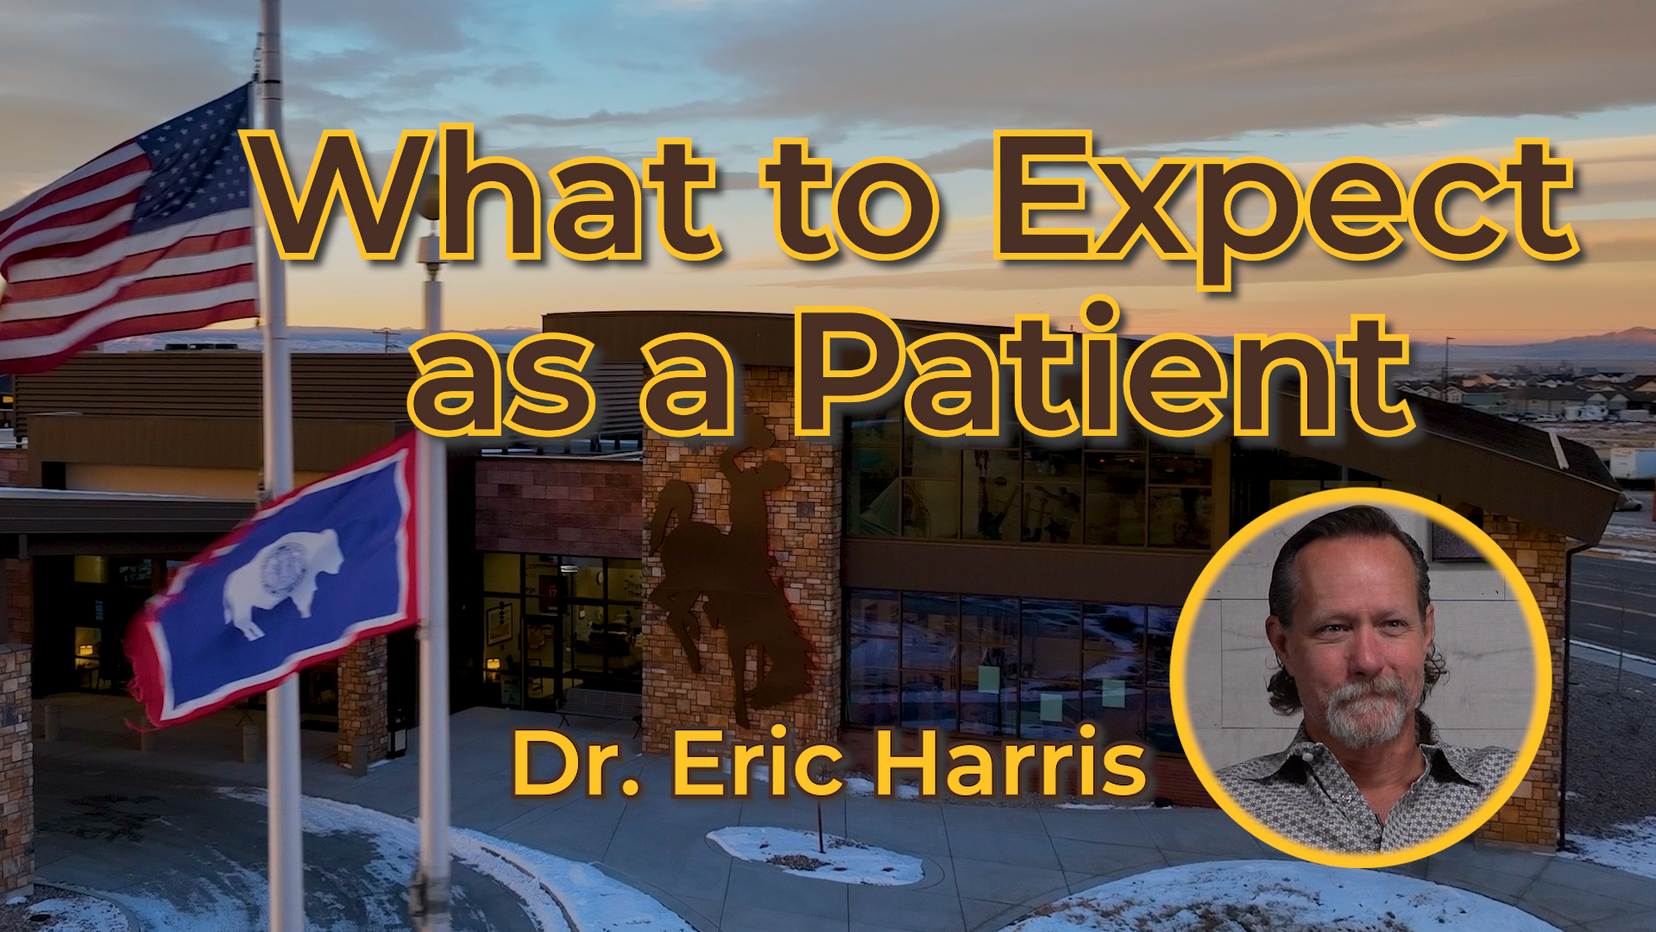 Get to know Dr. Harris